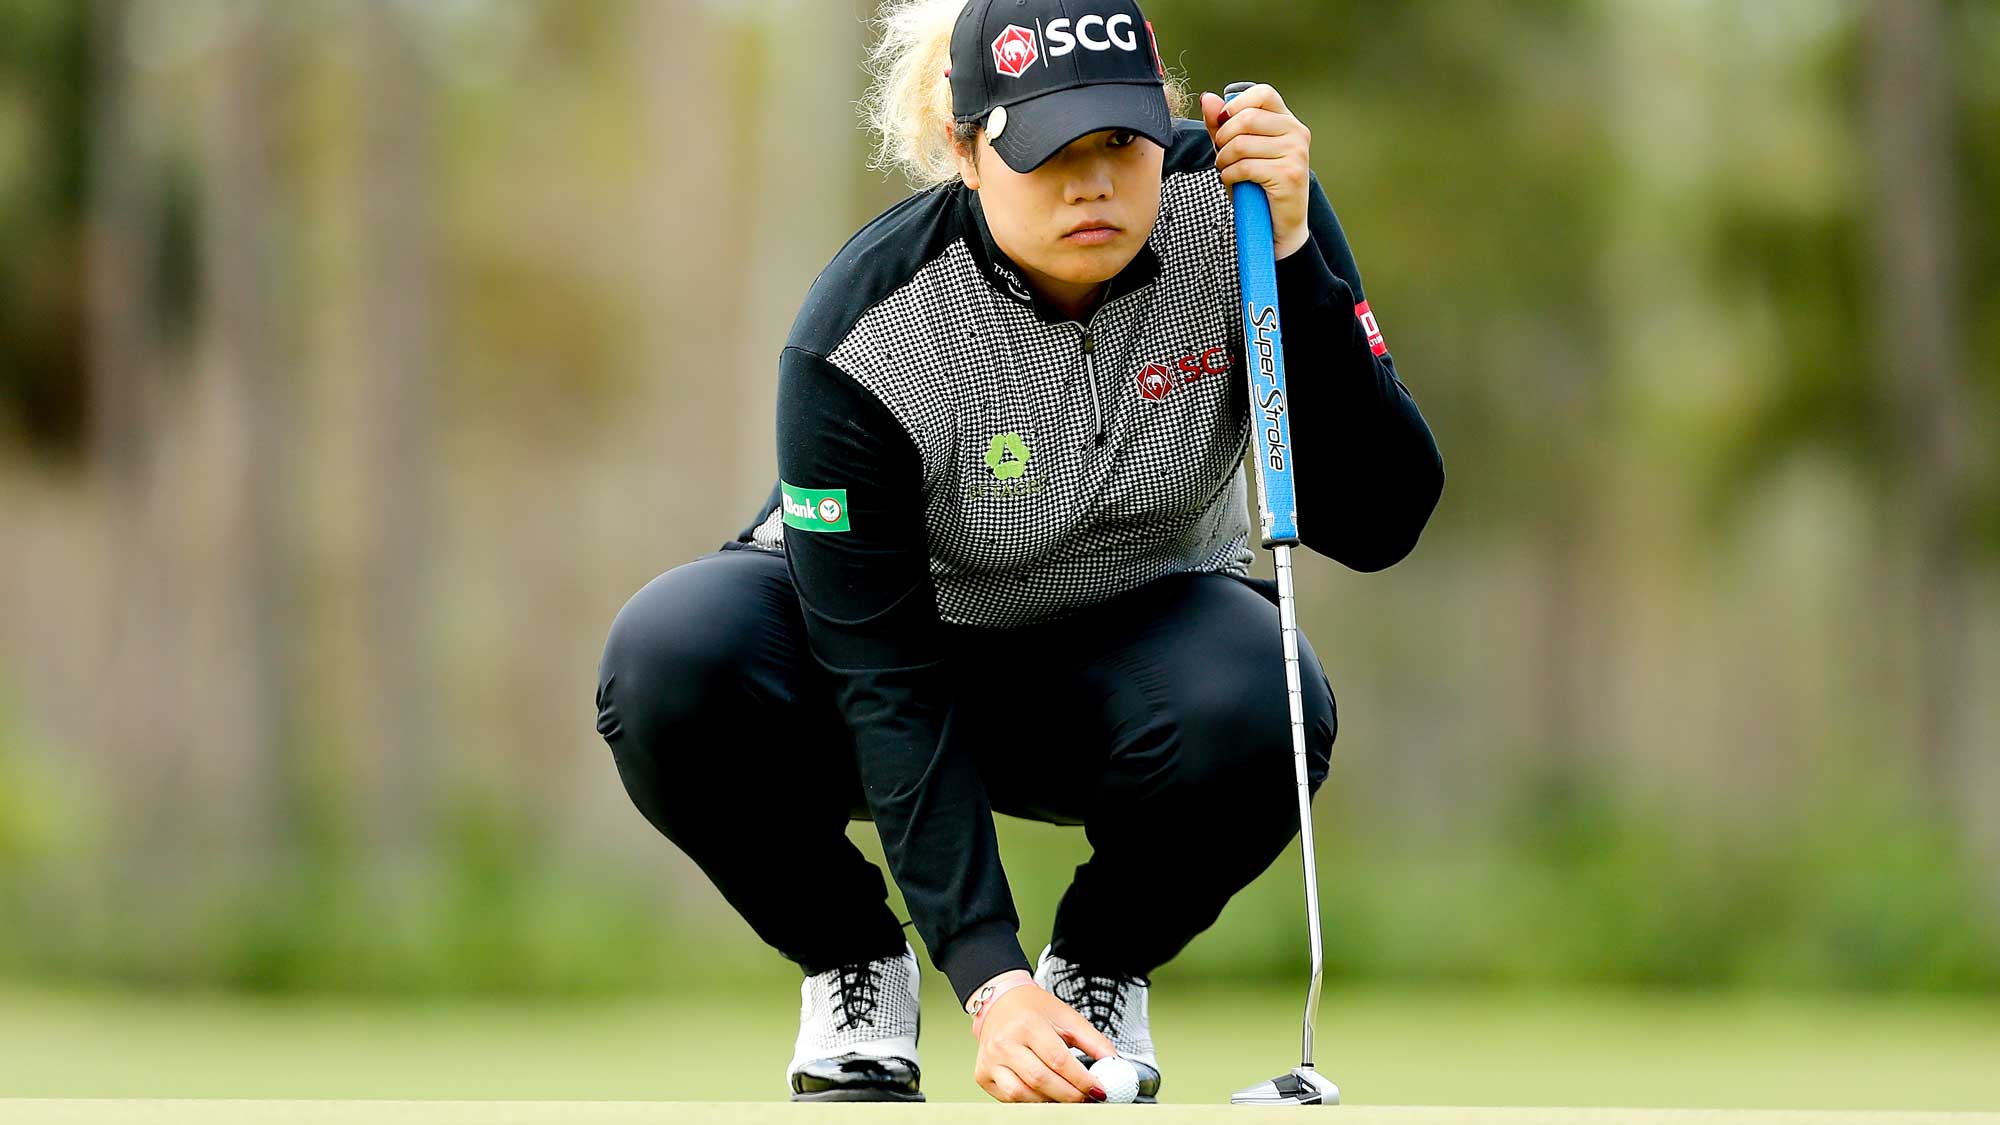 Ariya Jutanugarn of Thailand looks over a putt on the first green during the final round of the LPGA CME Group Tour Championship